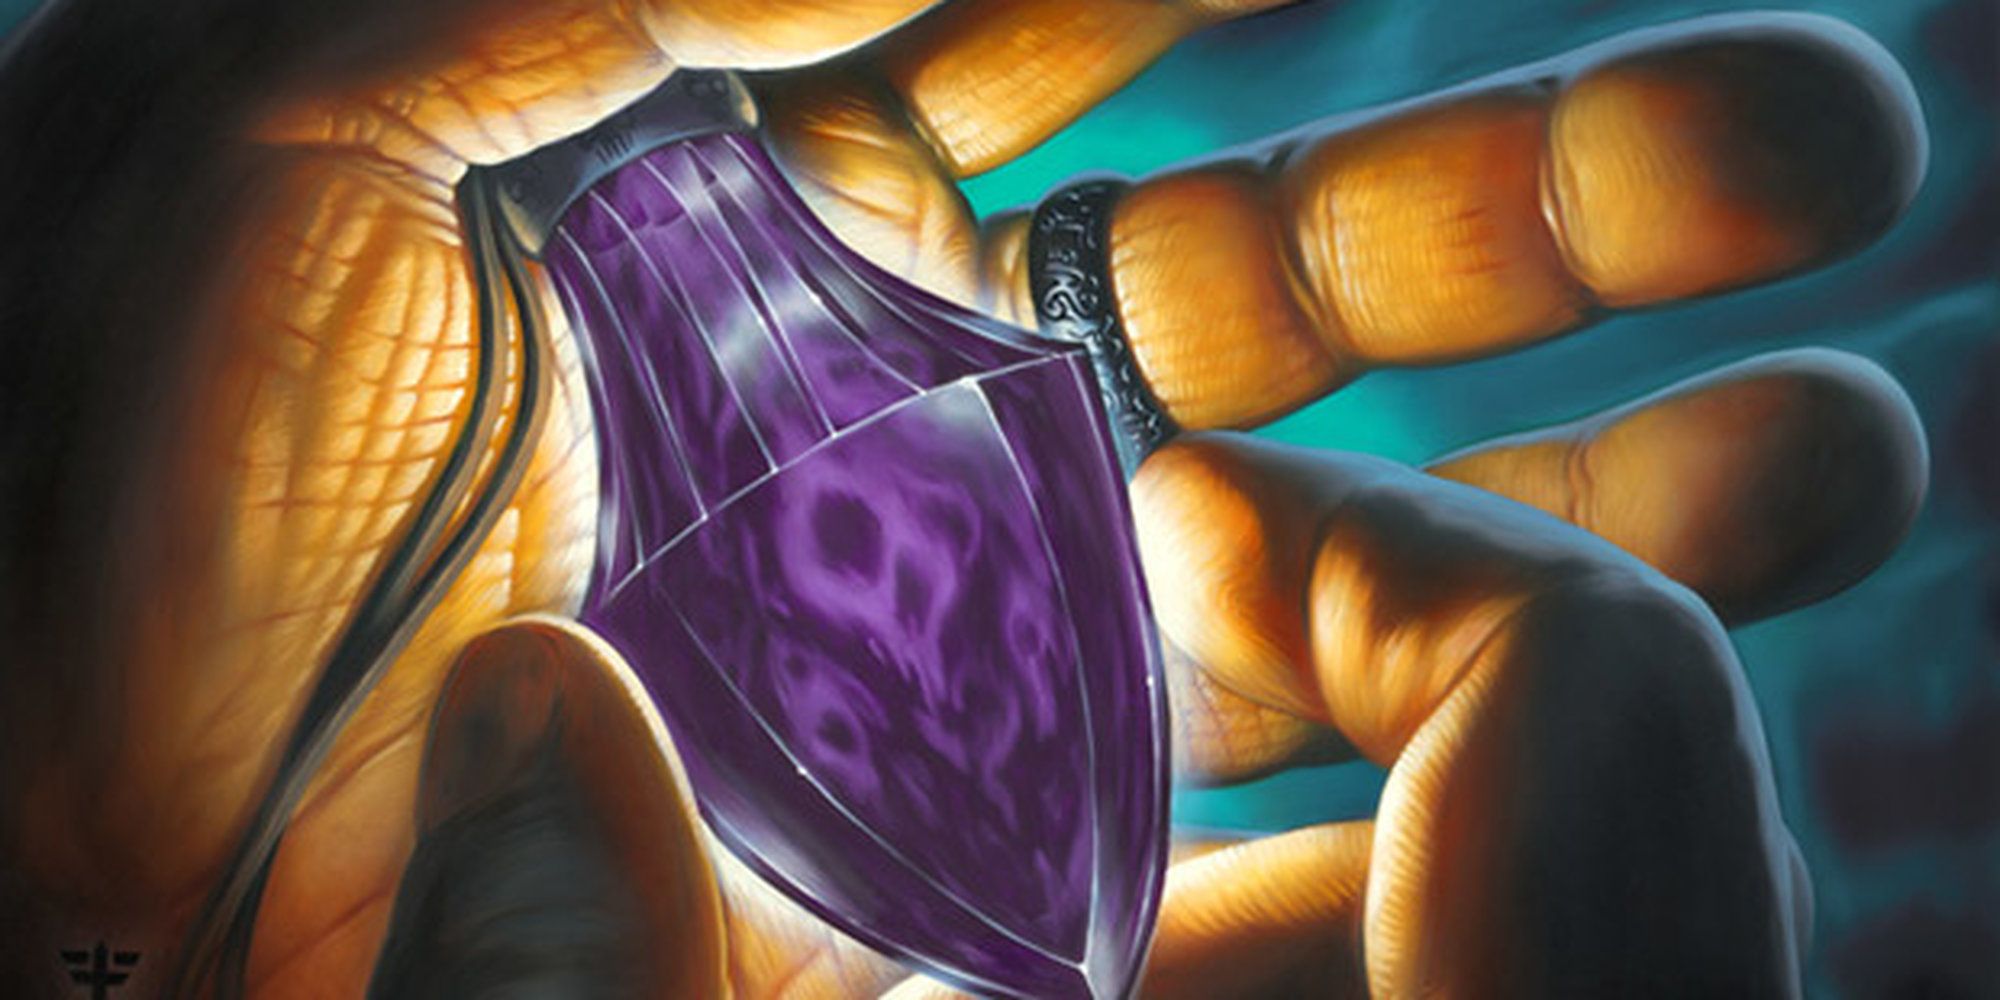 Art for the Vial of Poison card in Magic: the Gathering